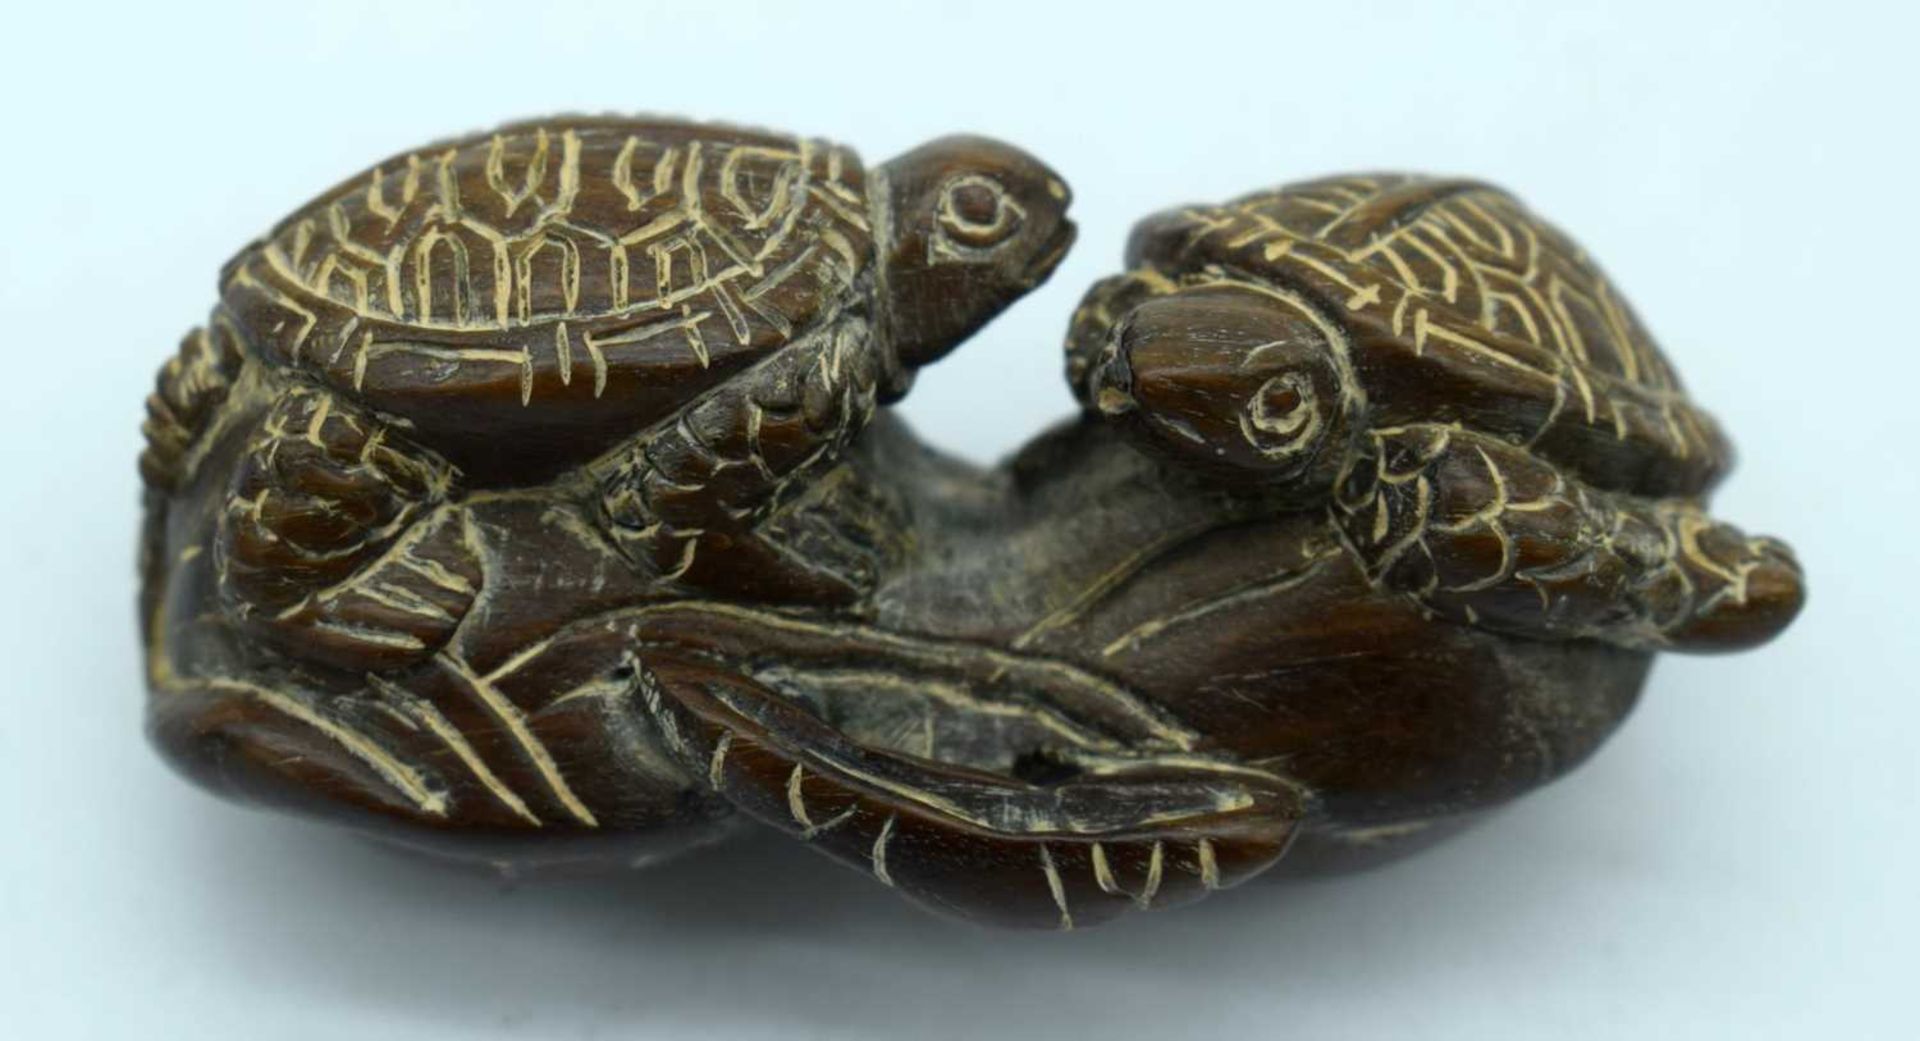 A Carved Hardwood Netsuke of Two Turtles. 2.8cm x 5.8cm x 2.7cm. Weight 27.1g